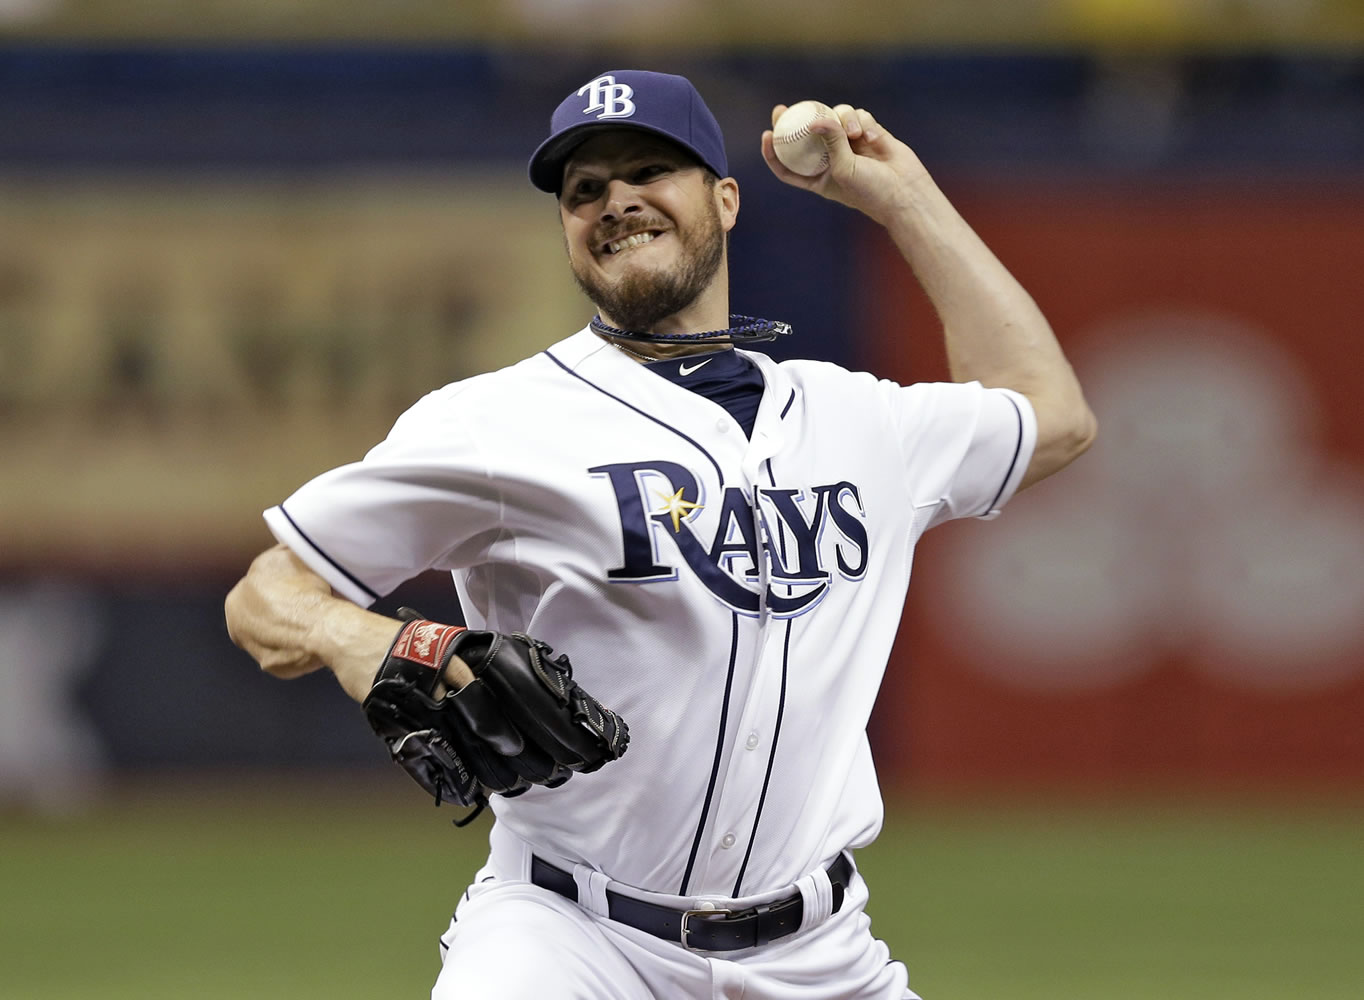 Tampa Bay Rays starting pitcher Erik Bedard delivers to the Seattle Mariners during the first inning of a baseball game Friday, June 6, 2014, in St. Petersburg, Fla.